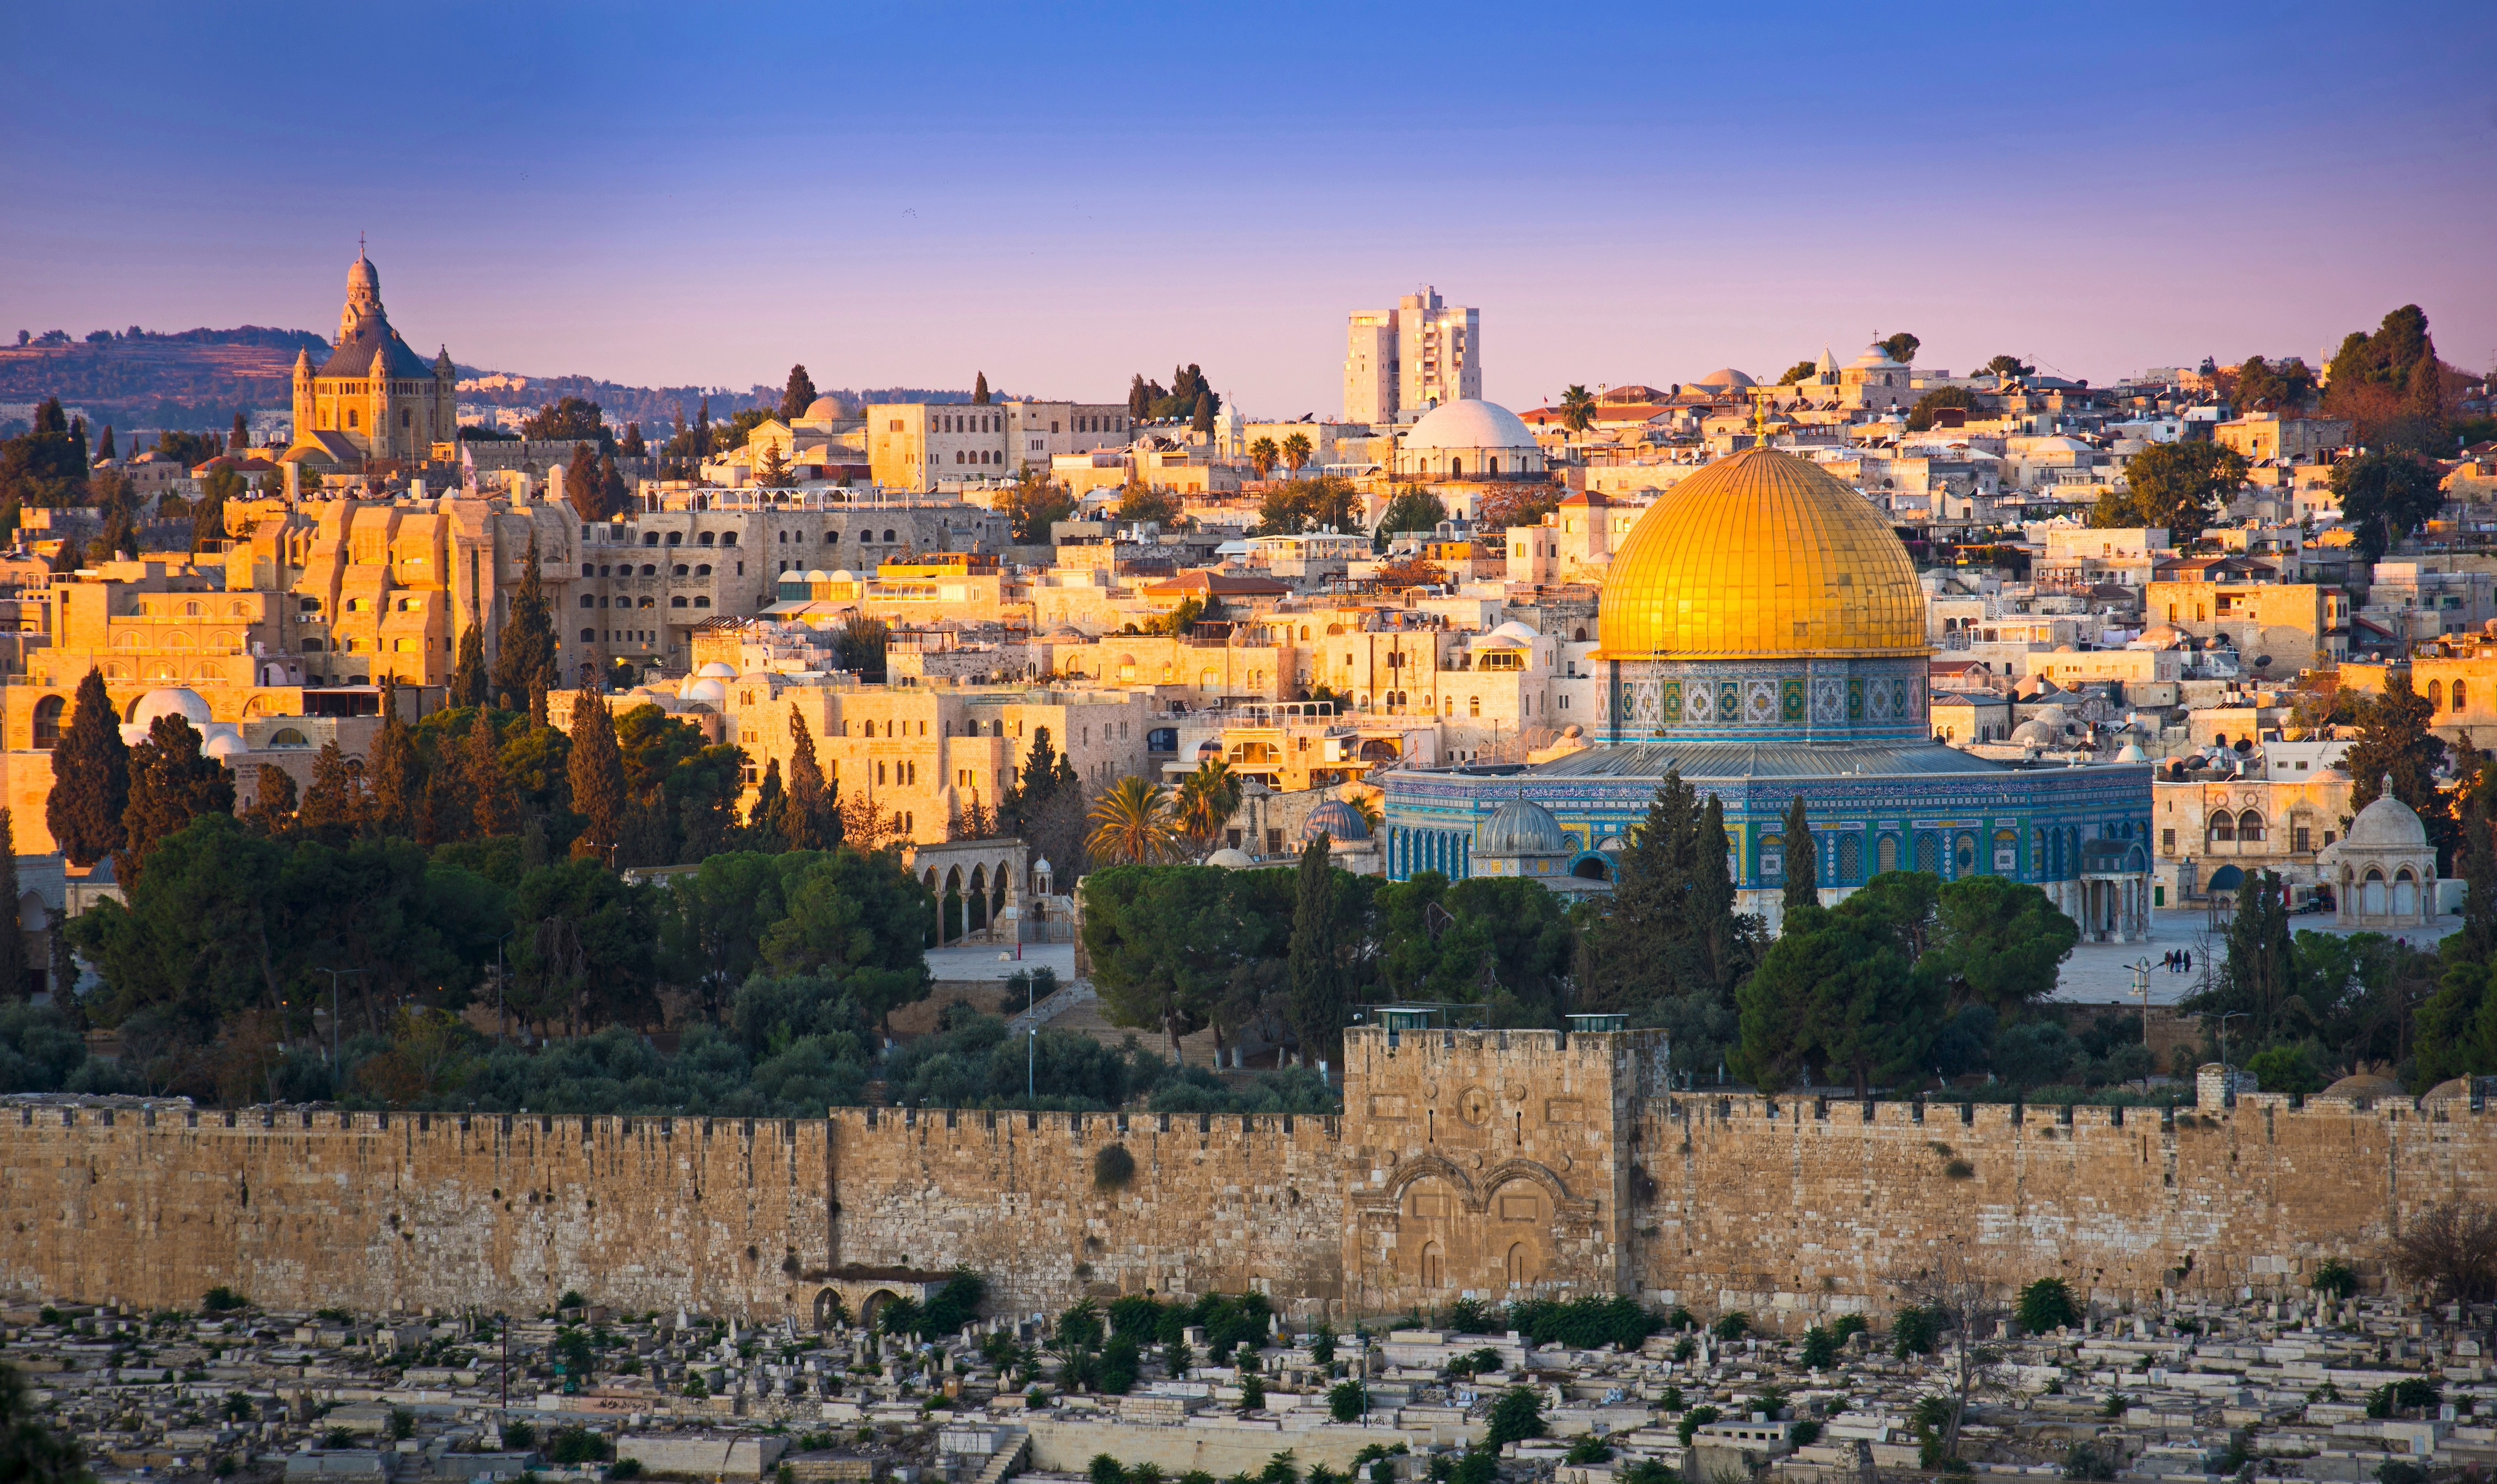 The Temple Mount as viewed from the Mt. of Olives. Jesus would have had a similar view during the Olivet Discourse.